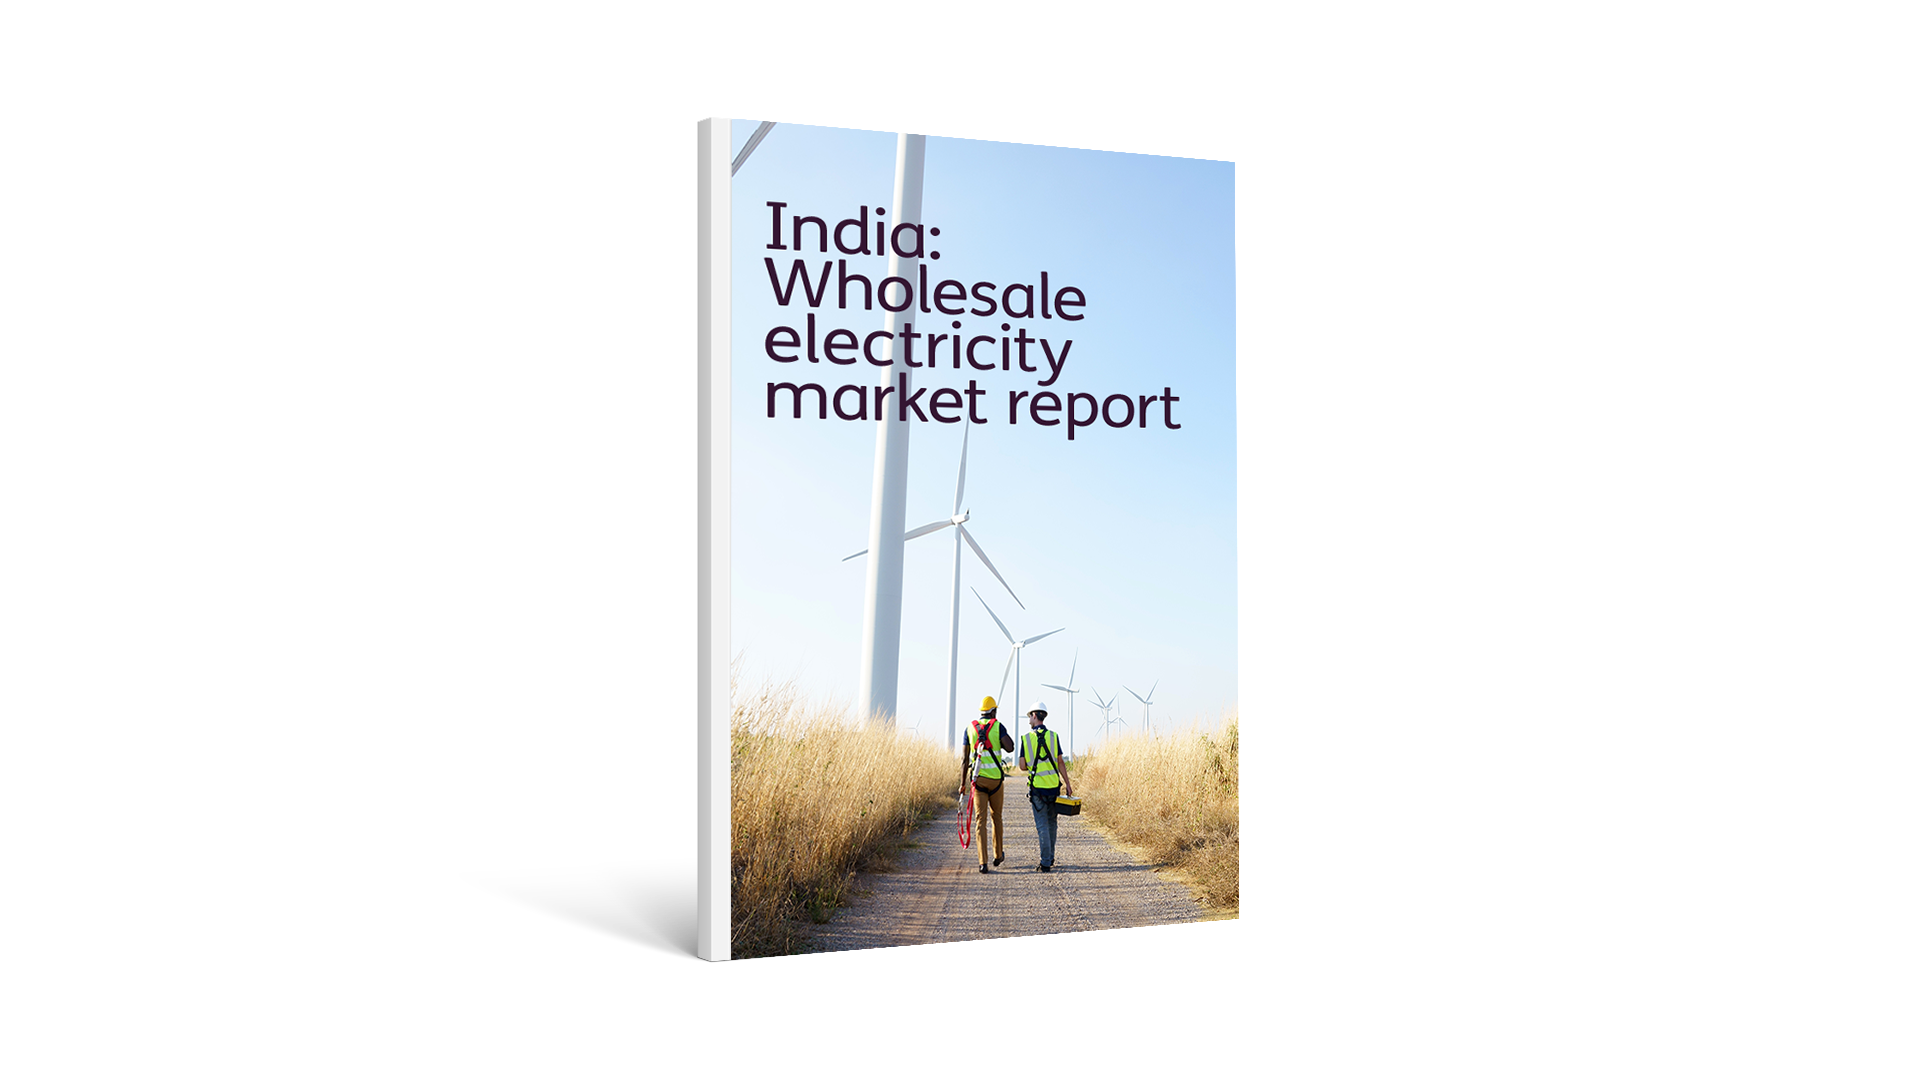 India: Wholesale electricity market report